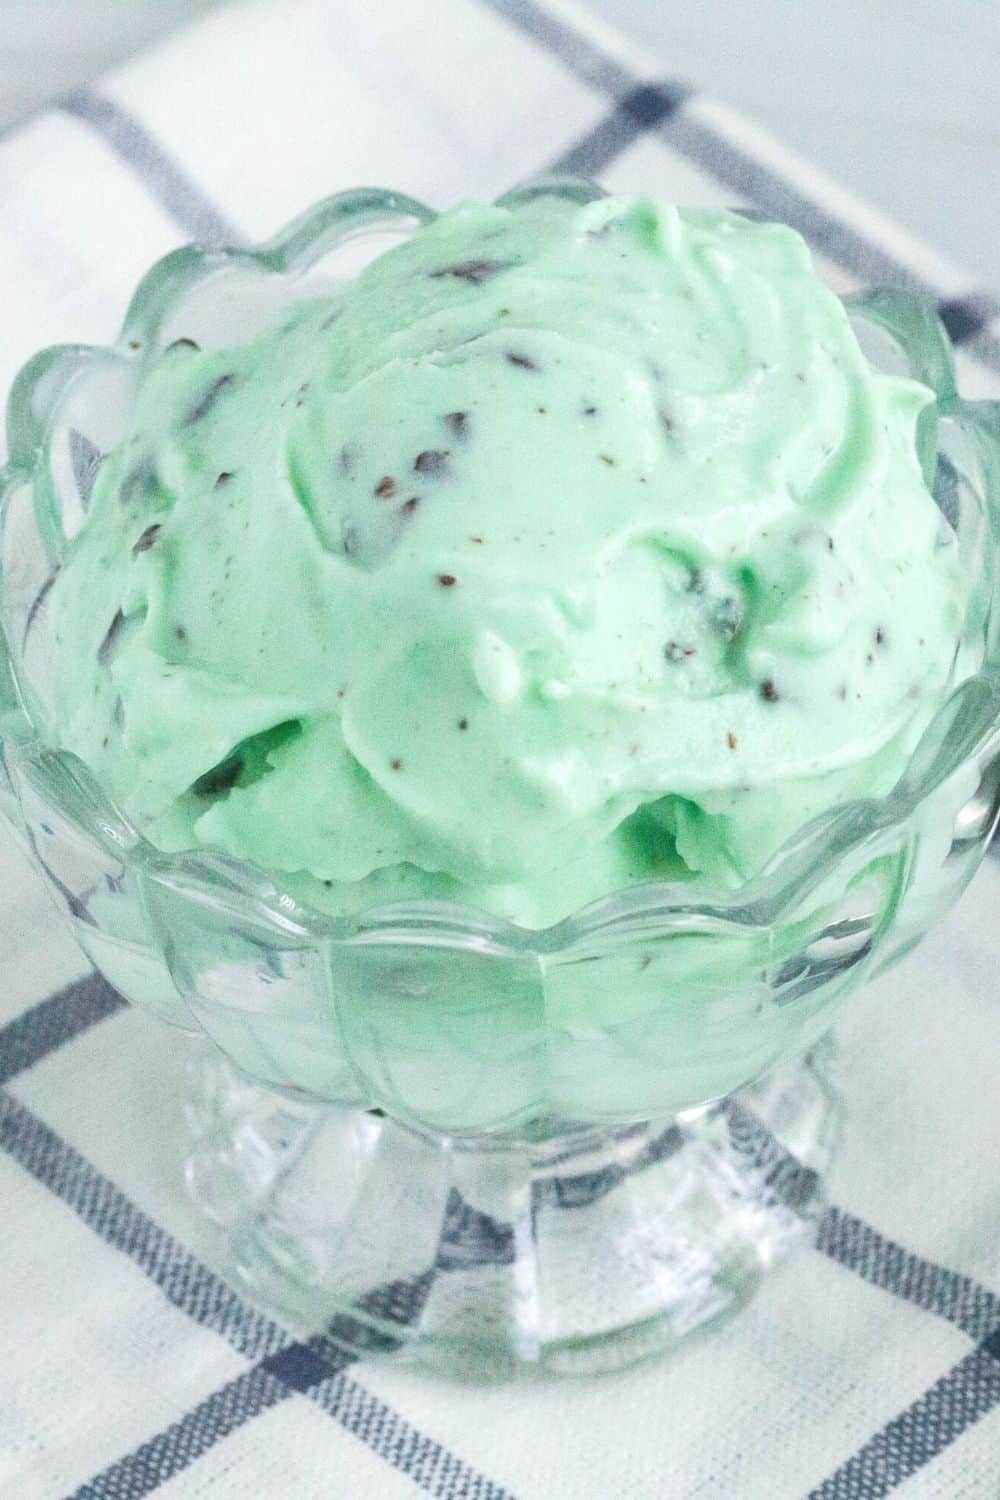 a scoop of Ninja Creami mint chip ice cream in a glass dessert cup.